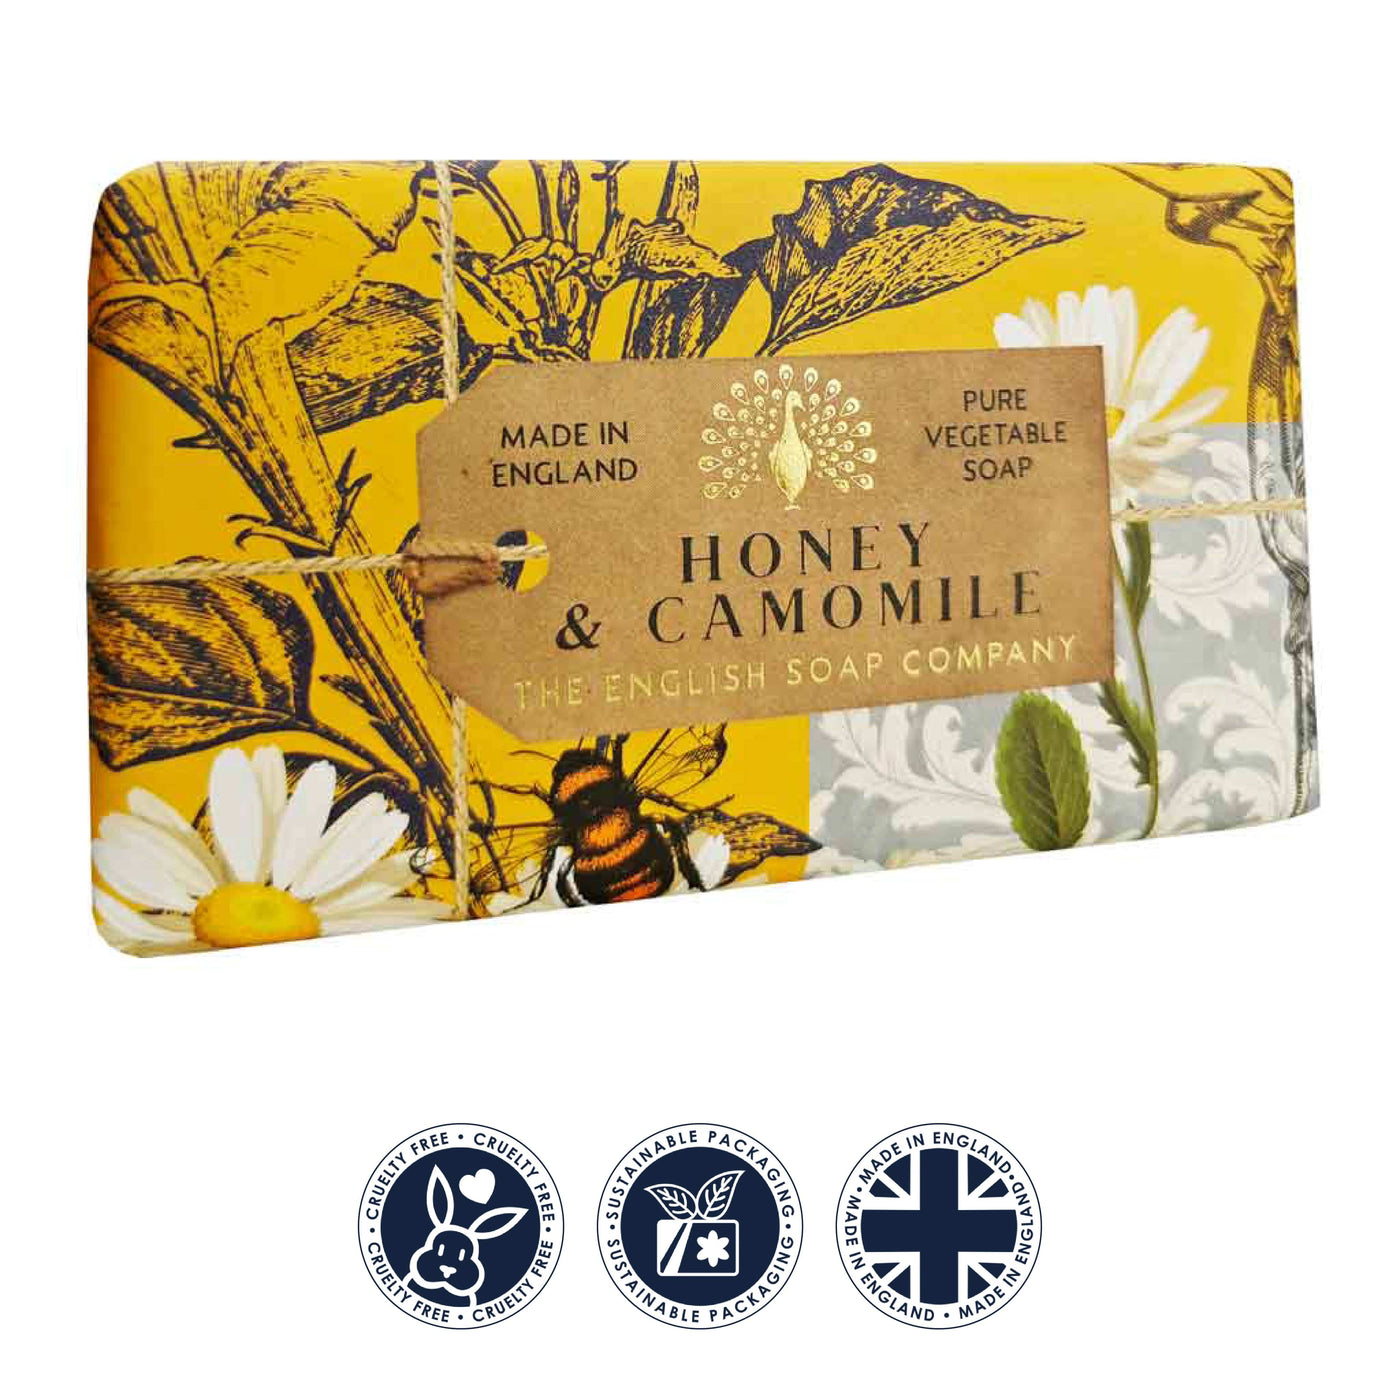 Anniversary Honey & Camomile Soap Bar from our Luxury Bar Soap collection by The English Soap Company